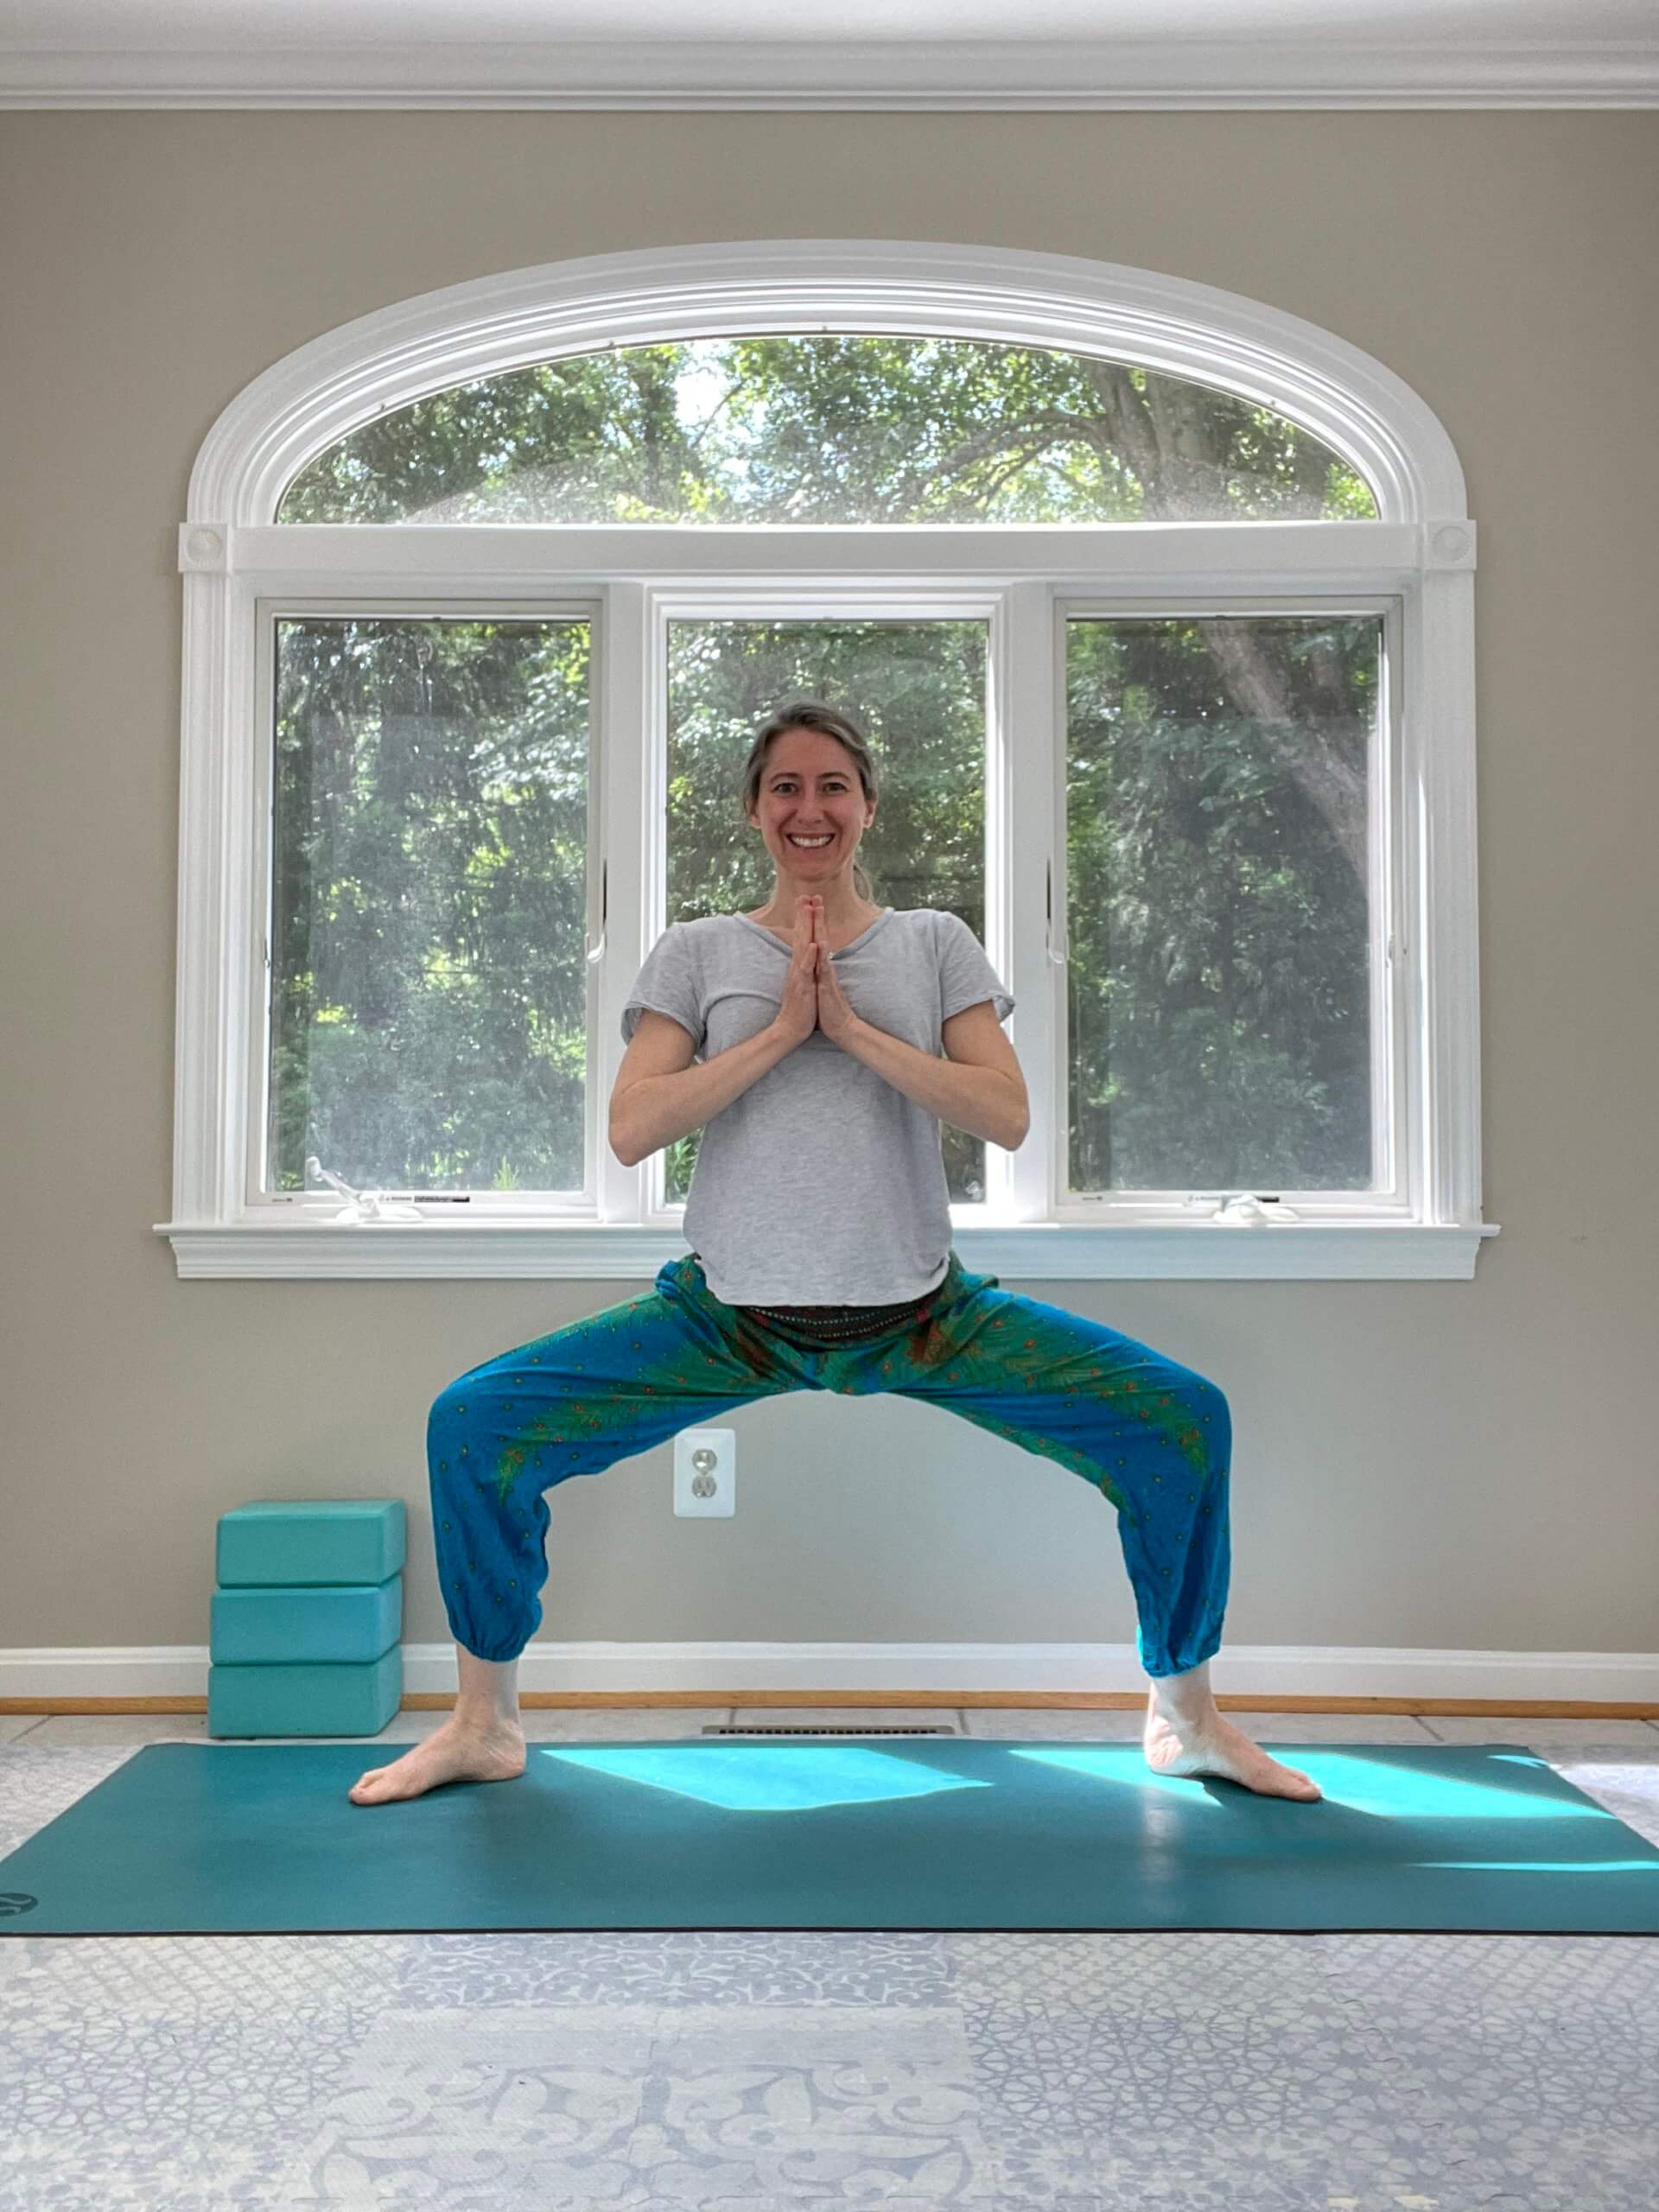 A woman in blue flowy pants and a blue top in Goddess Pose on a turquoise yoga mat